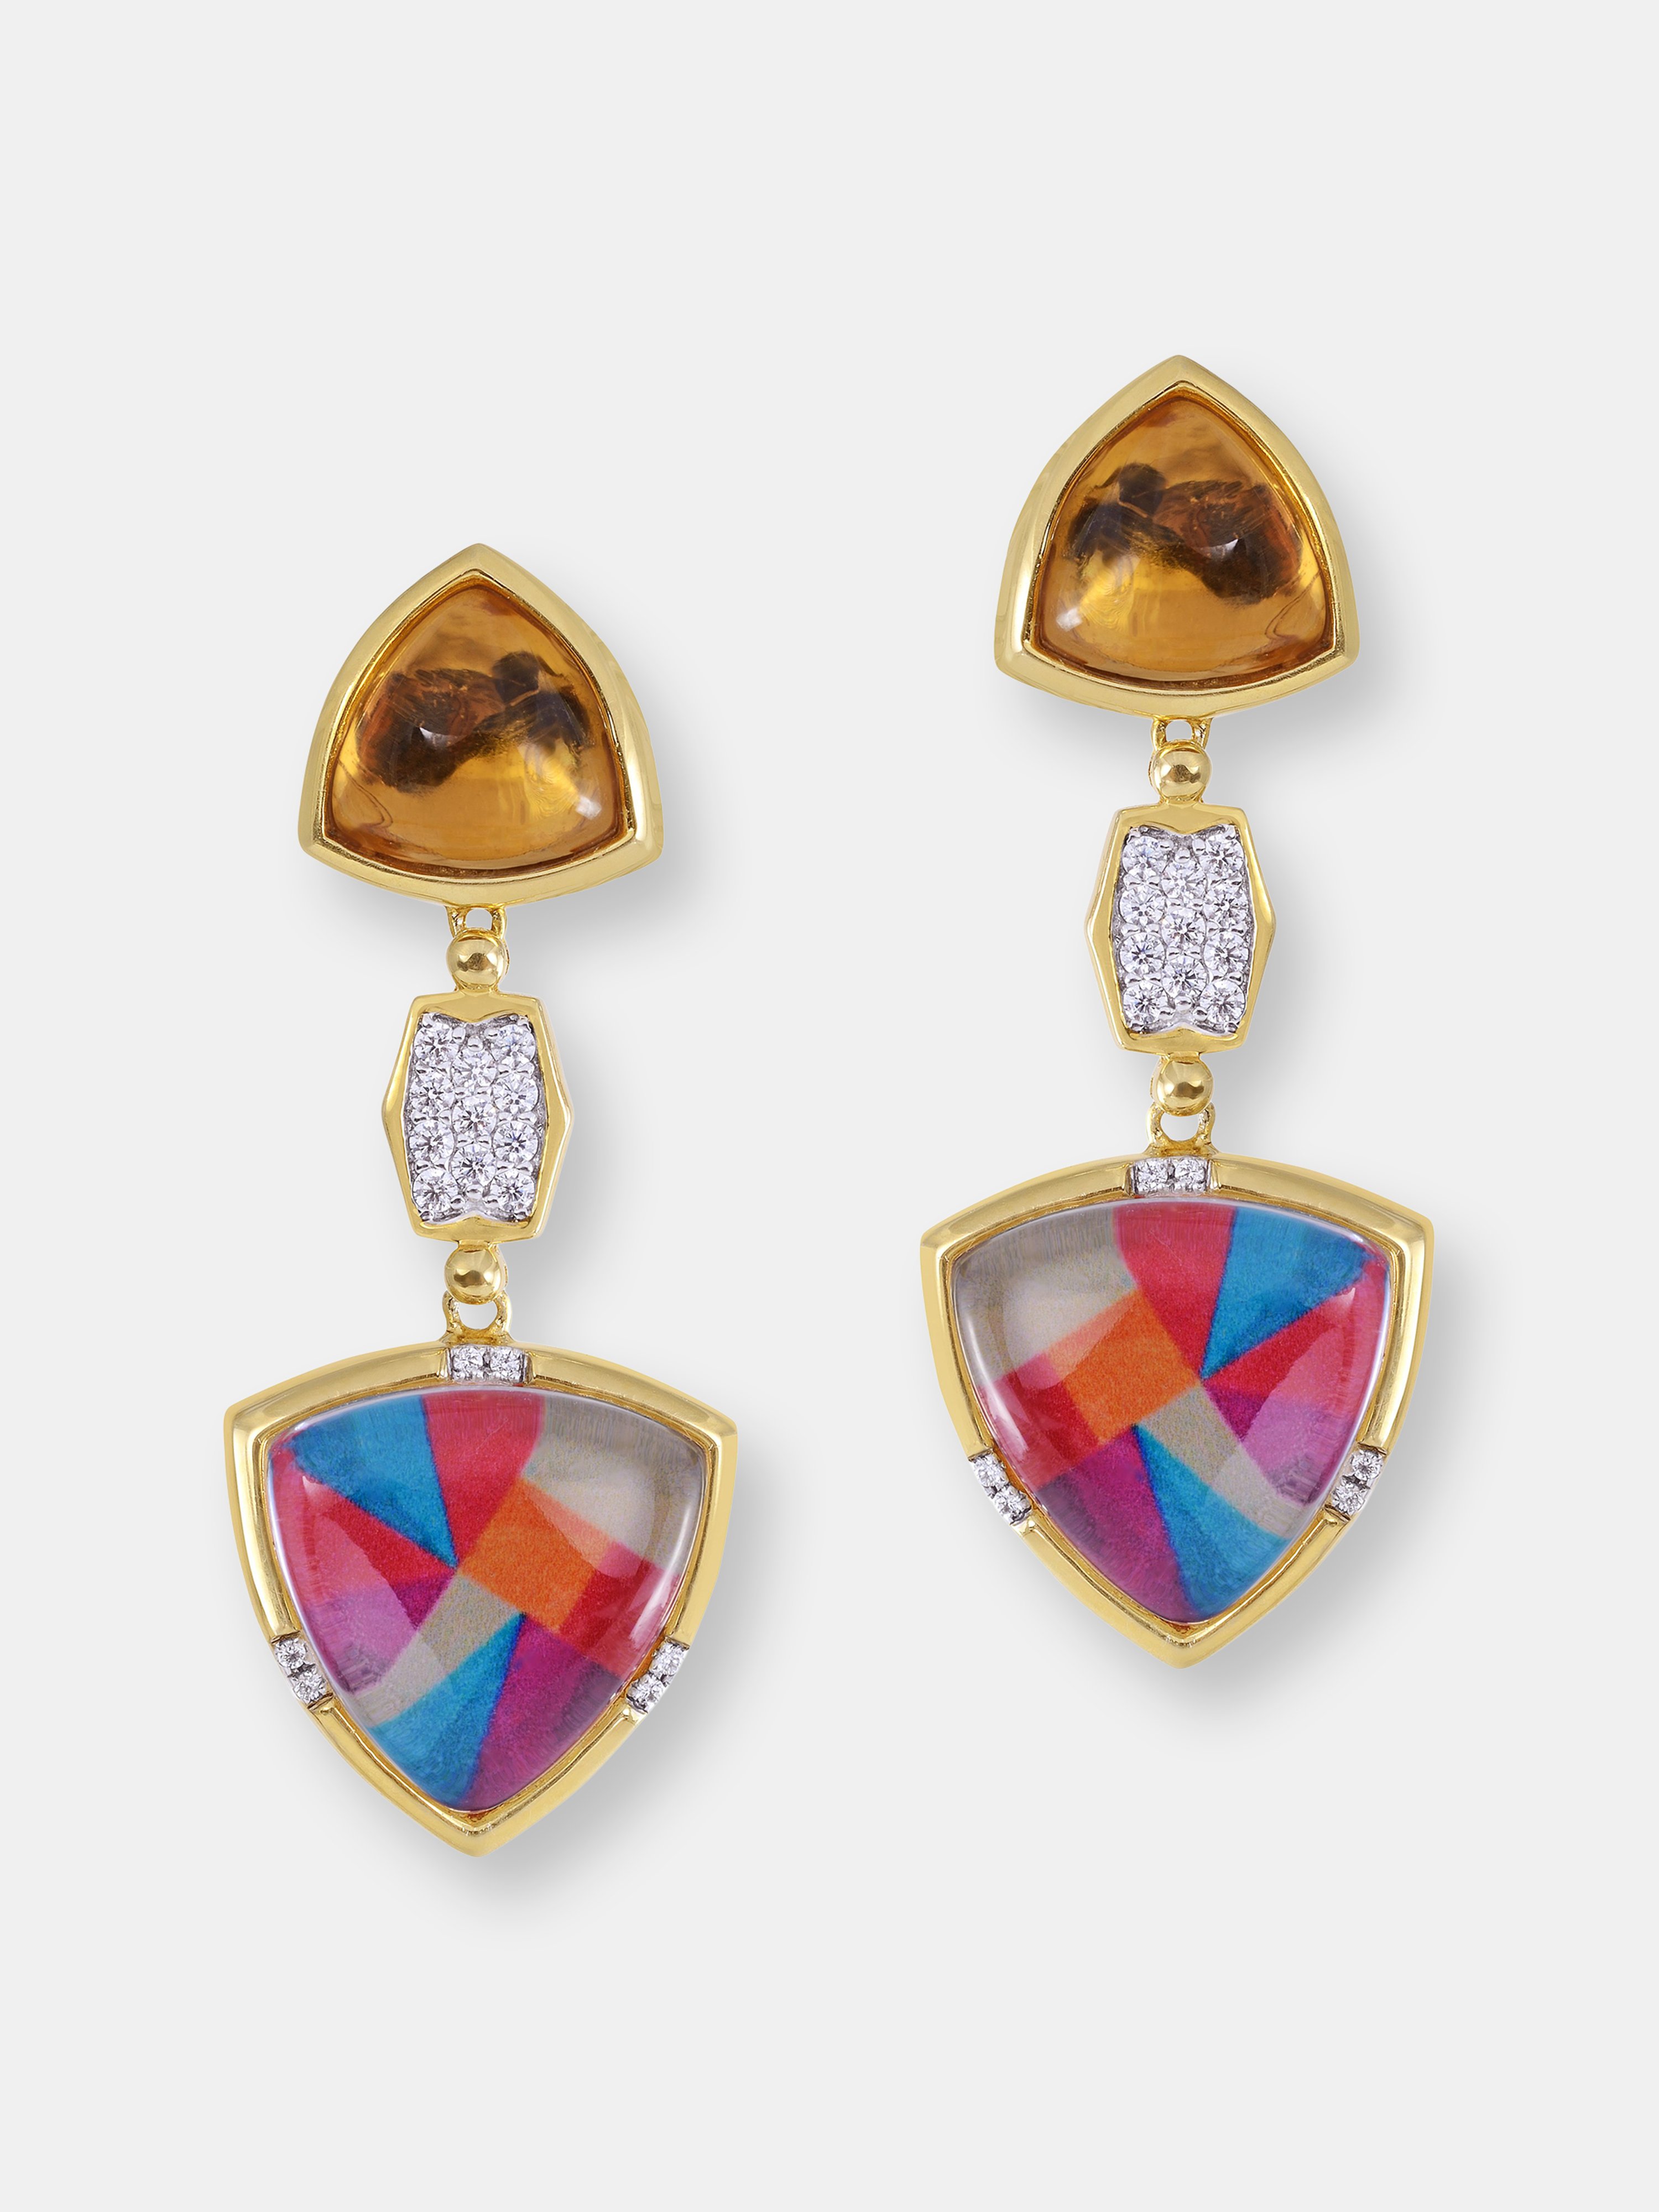 Luvmyjewelry Colorful Canvas Diamond & Citrine Earrings In 14k Yellow Gold Plated Sterling Silver